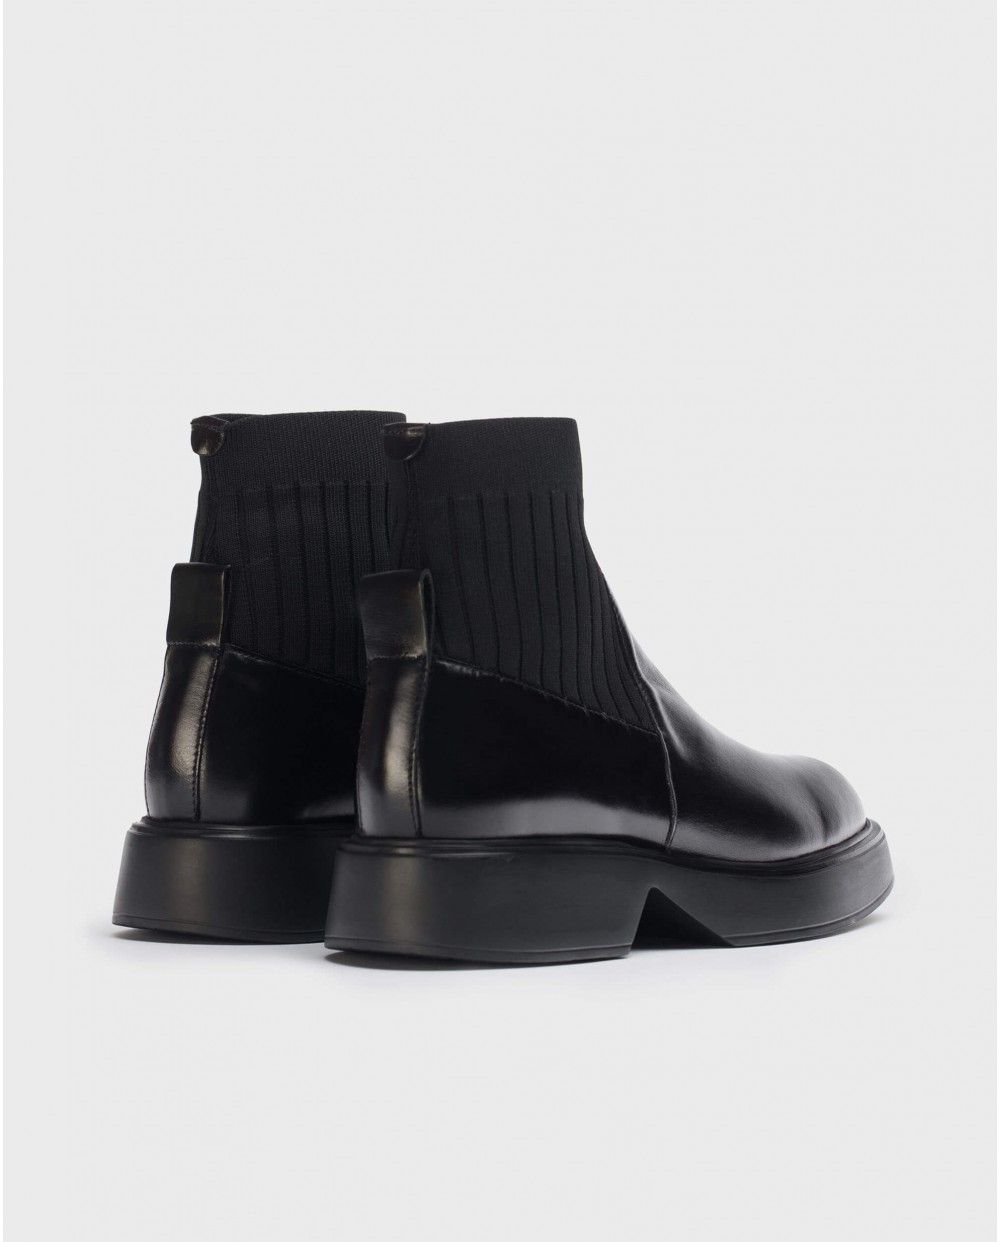 Wonders-Ankle Boots-Black Iron Ankle Boot